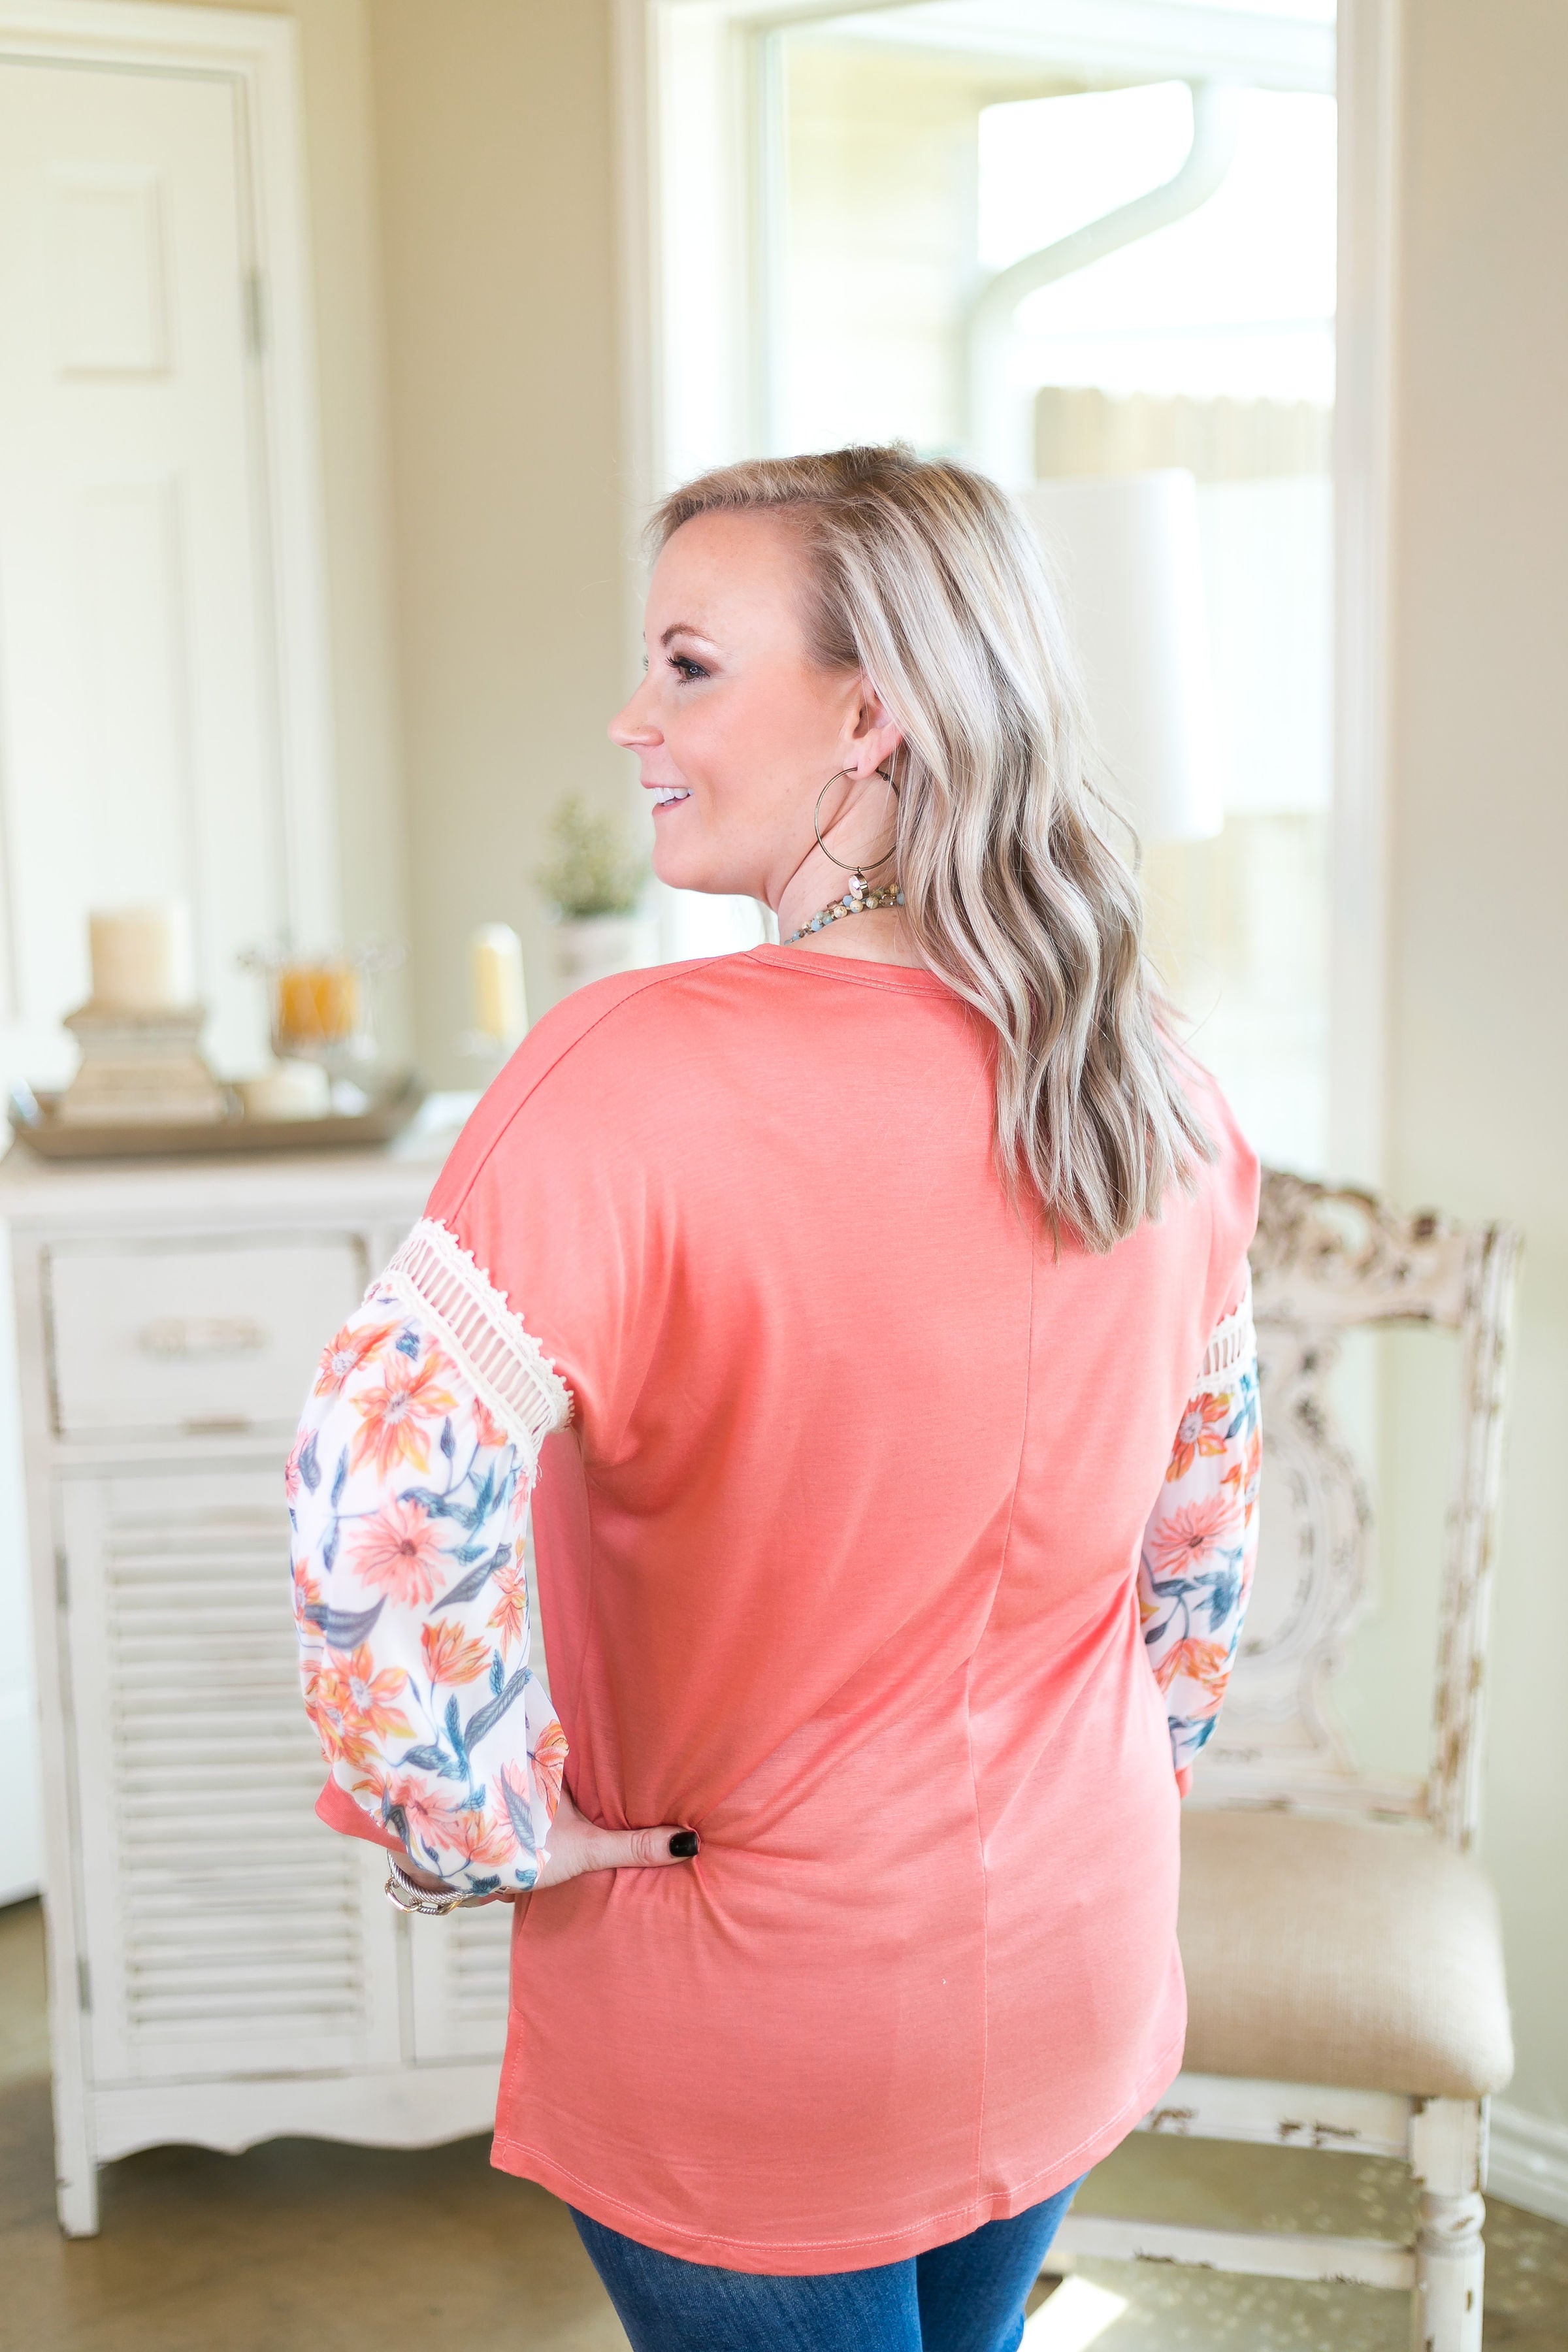 Nothing More Nothing Less Top with Sheer Floral Puff Sleeves in Coral - Giddy Up Glamour Boutique